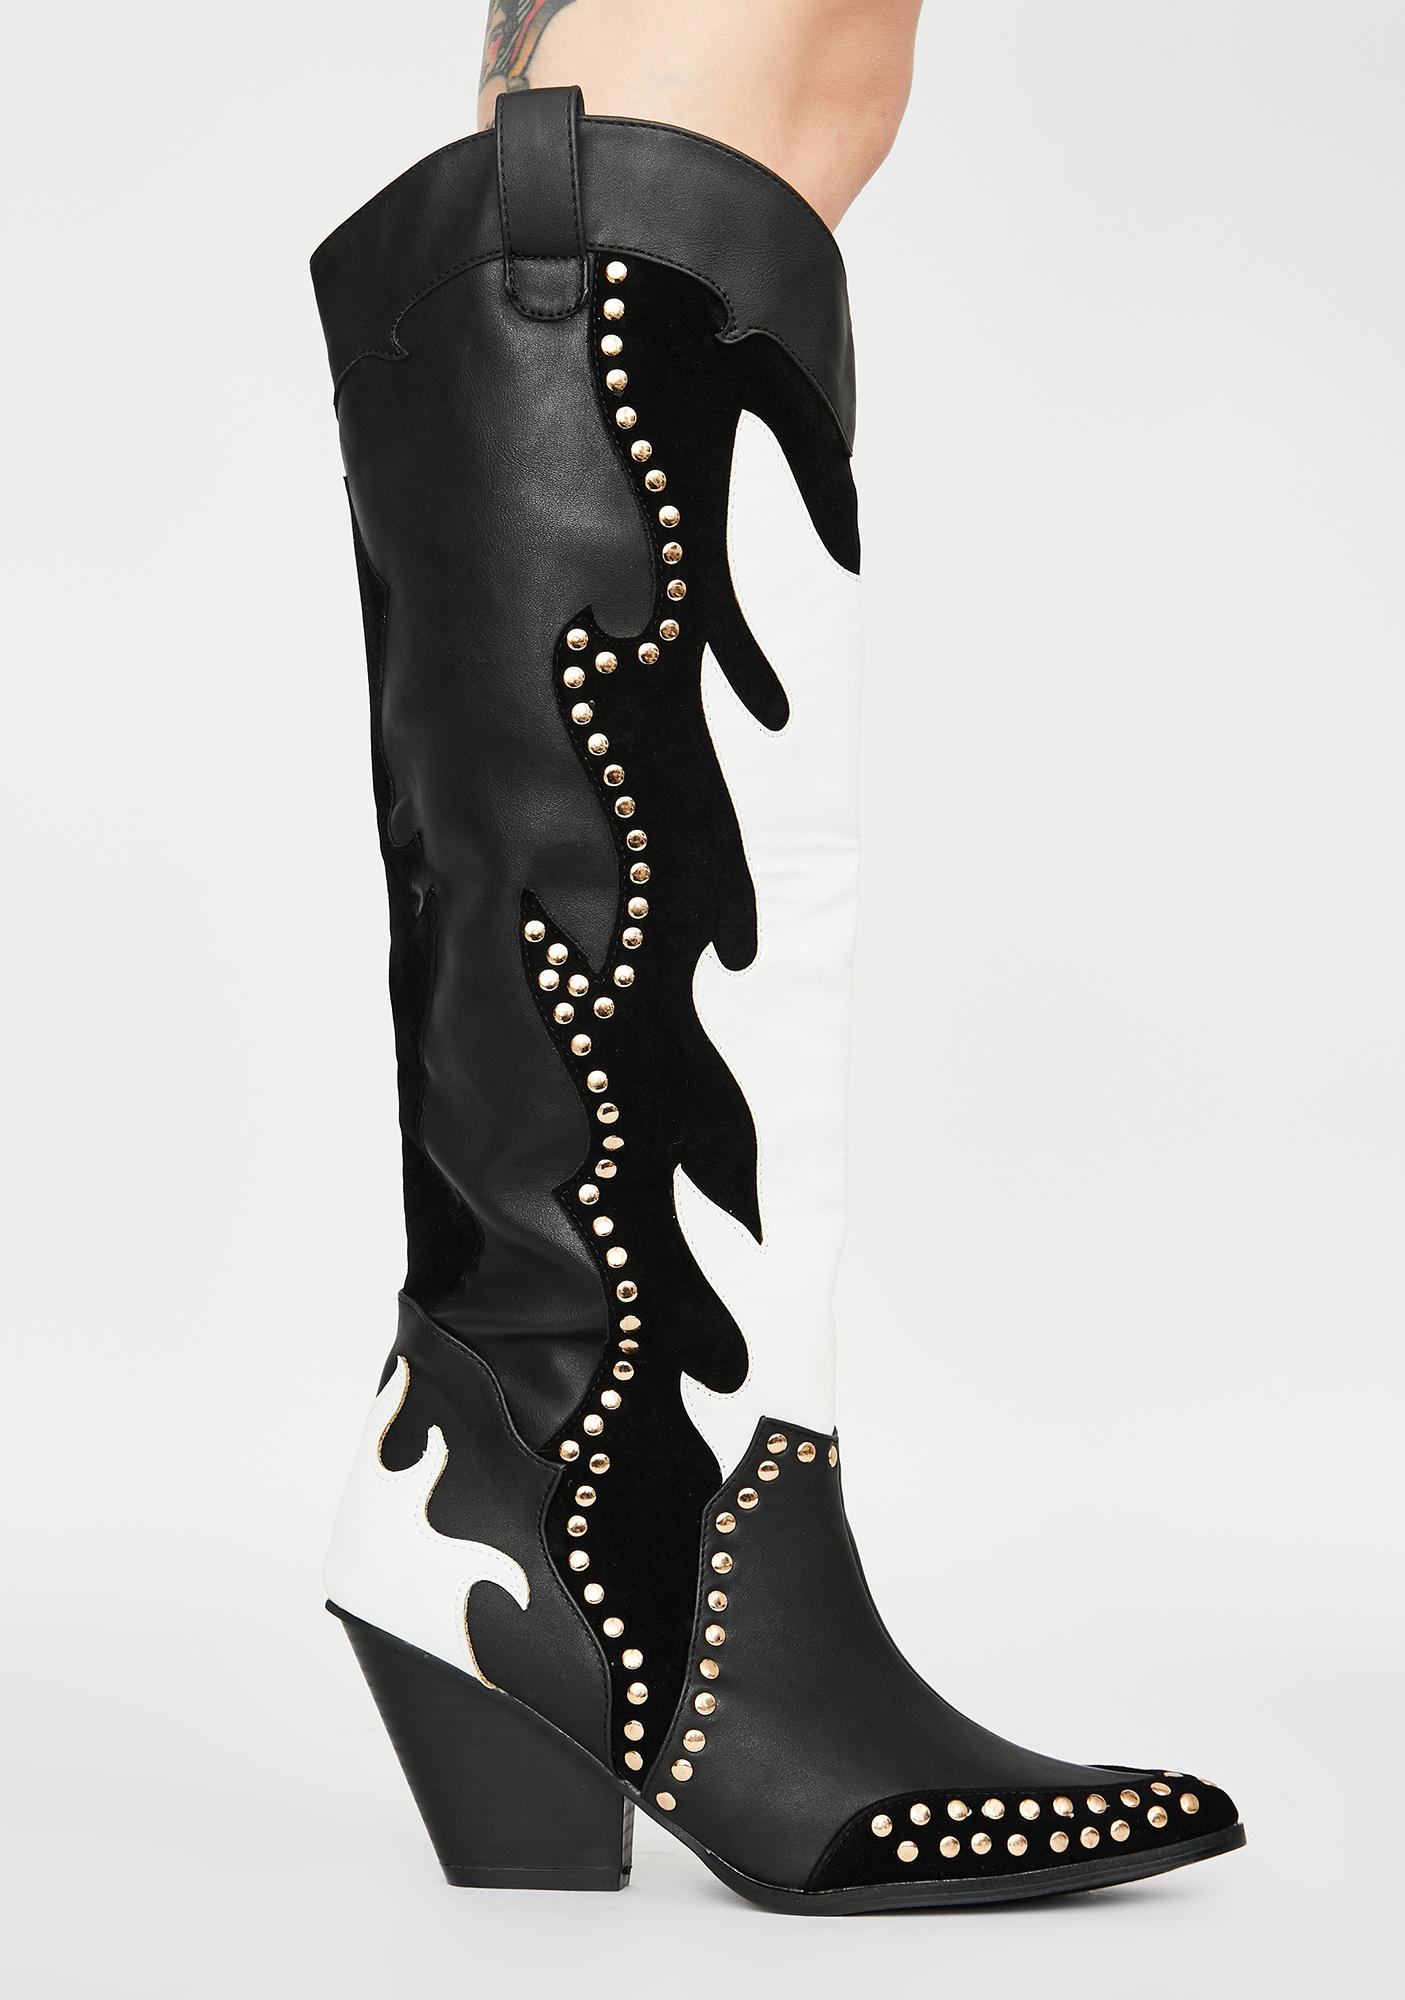 Contrast Print Knee High Cowgirl Boots Pointed Toes | Dolls Kill